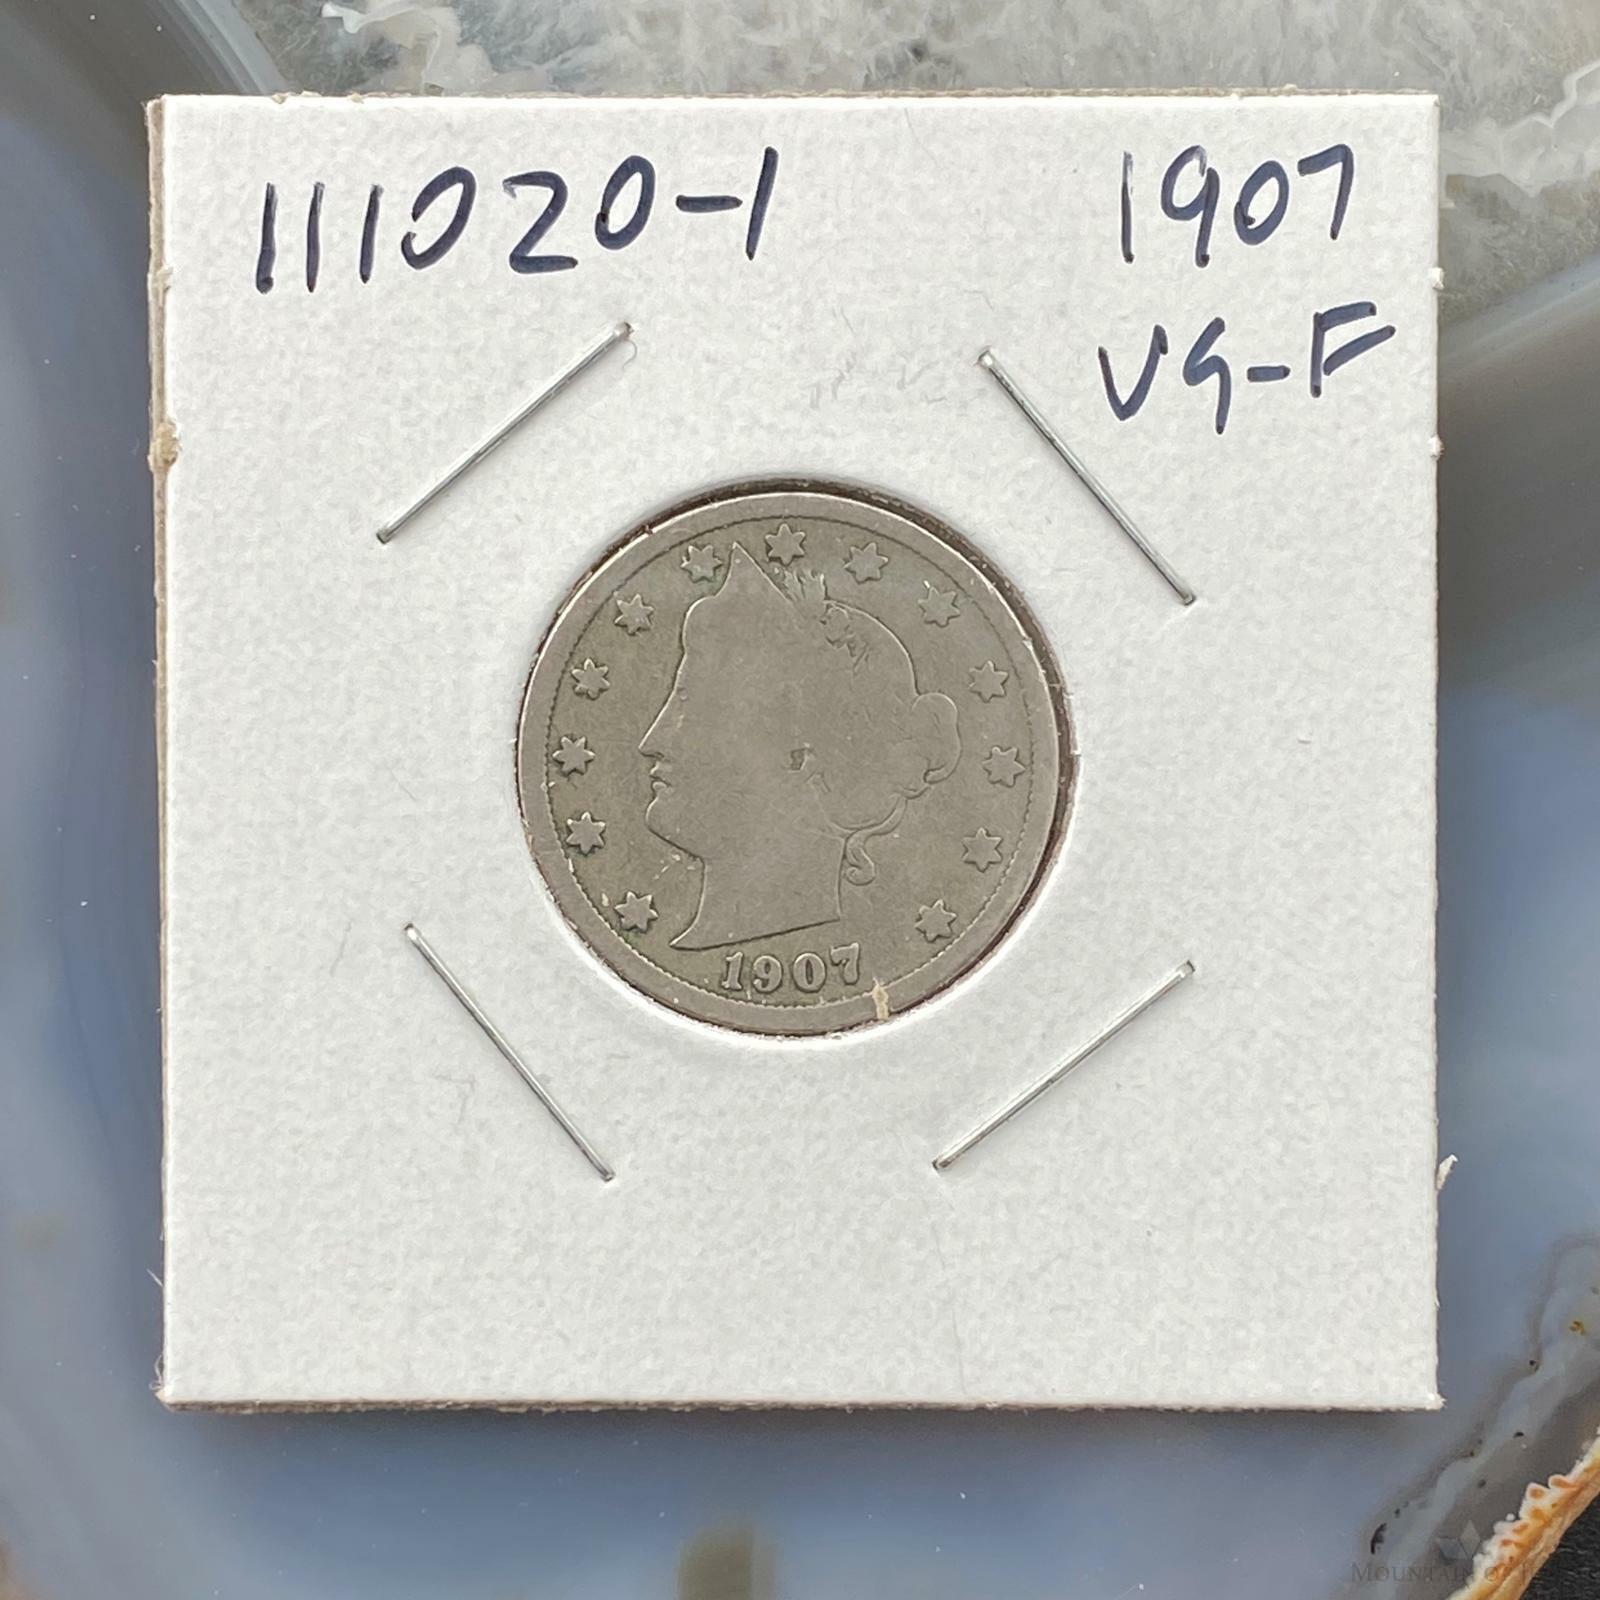 1907 US 5 Cent Liberty Head Nickel VG-F Collectible Coin #111020-1 - Mountain of Jewels